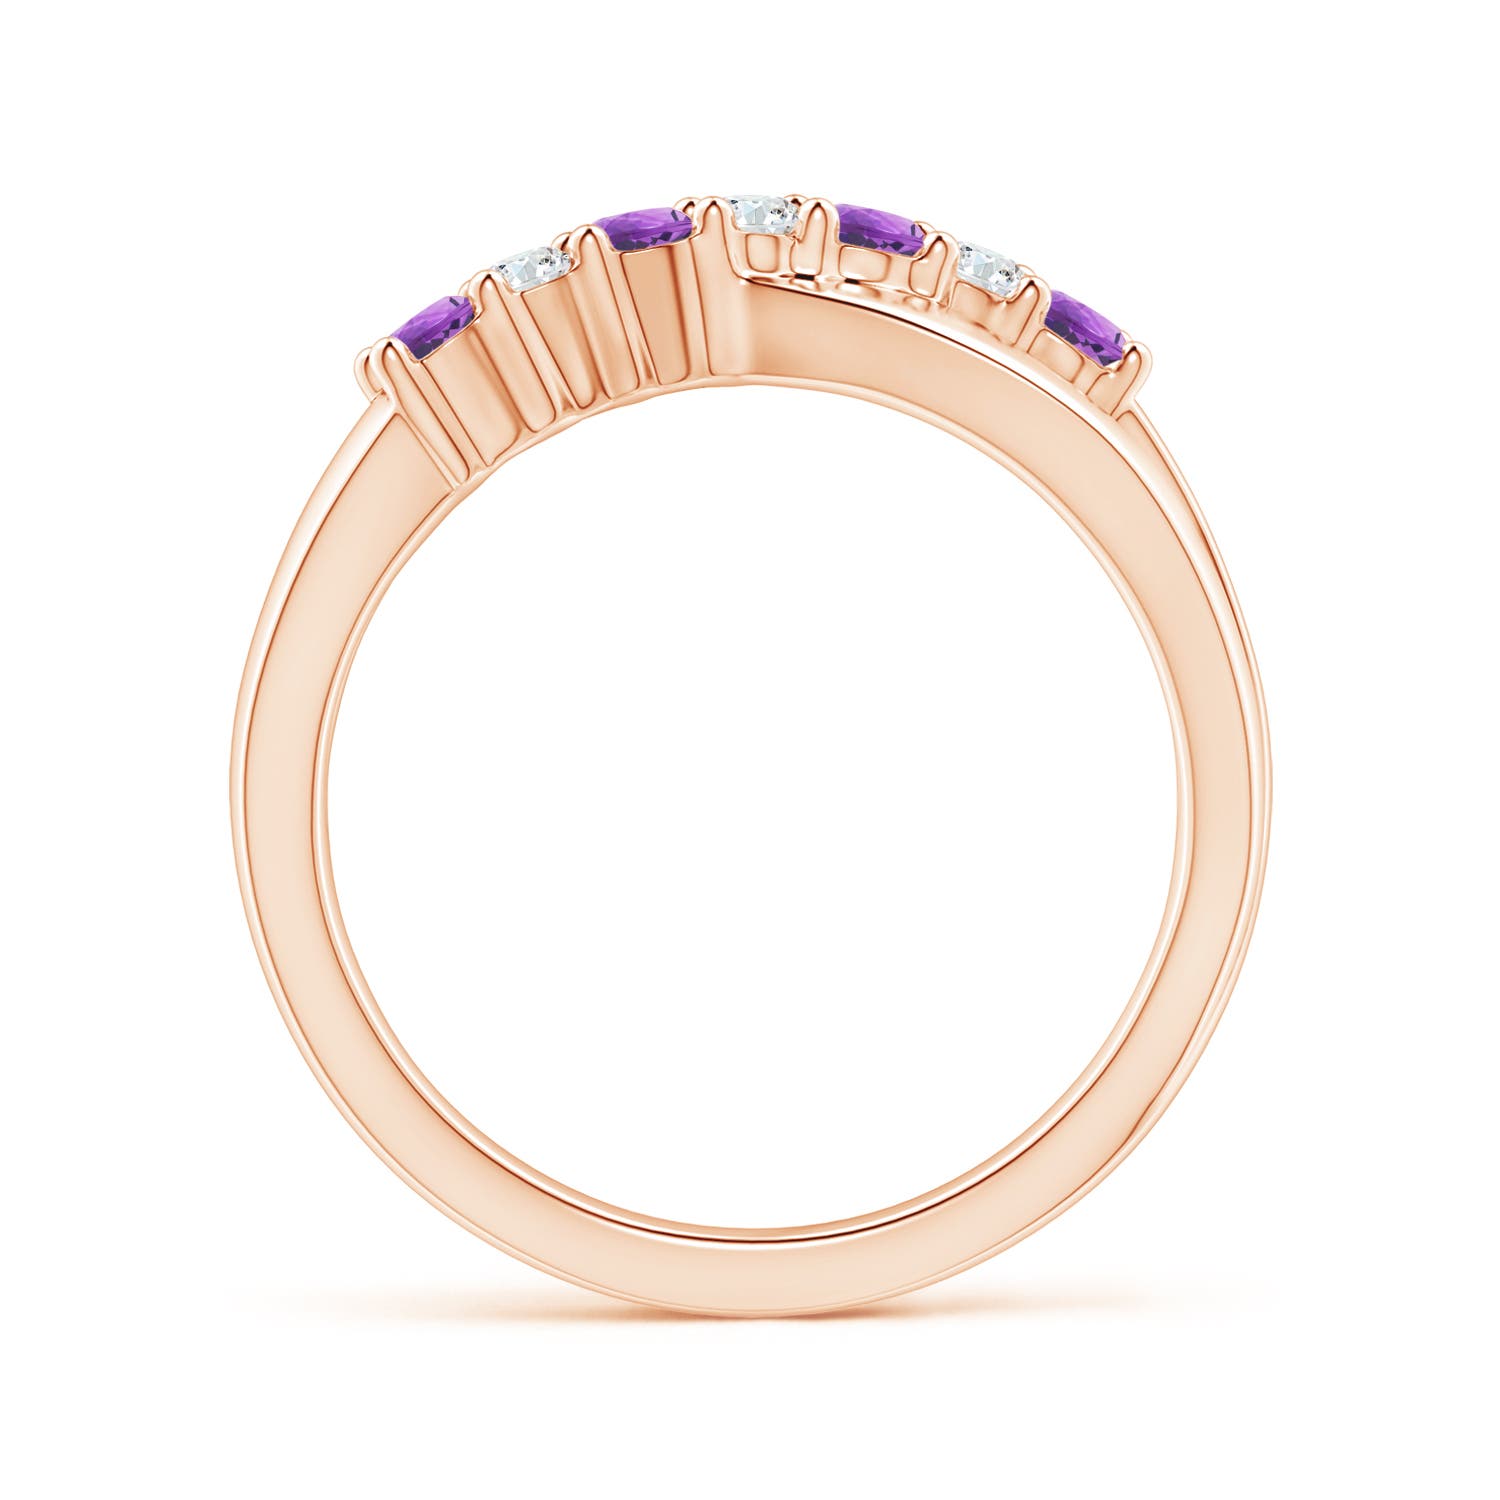 AA - Amethyst / 0.36 CT / 14 KT Rose Gold